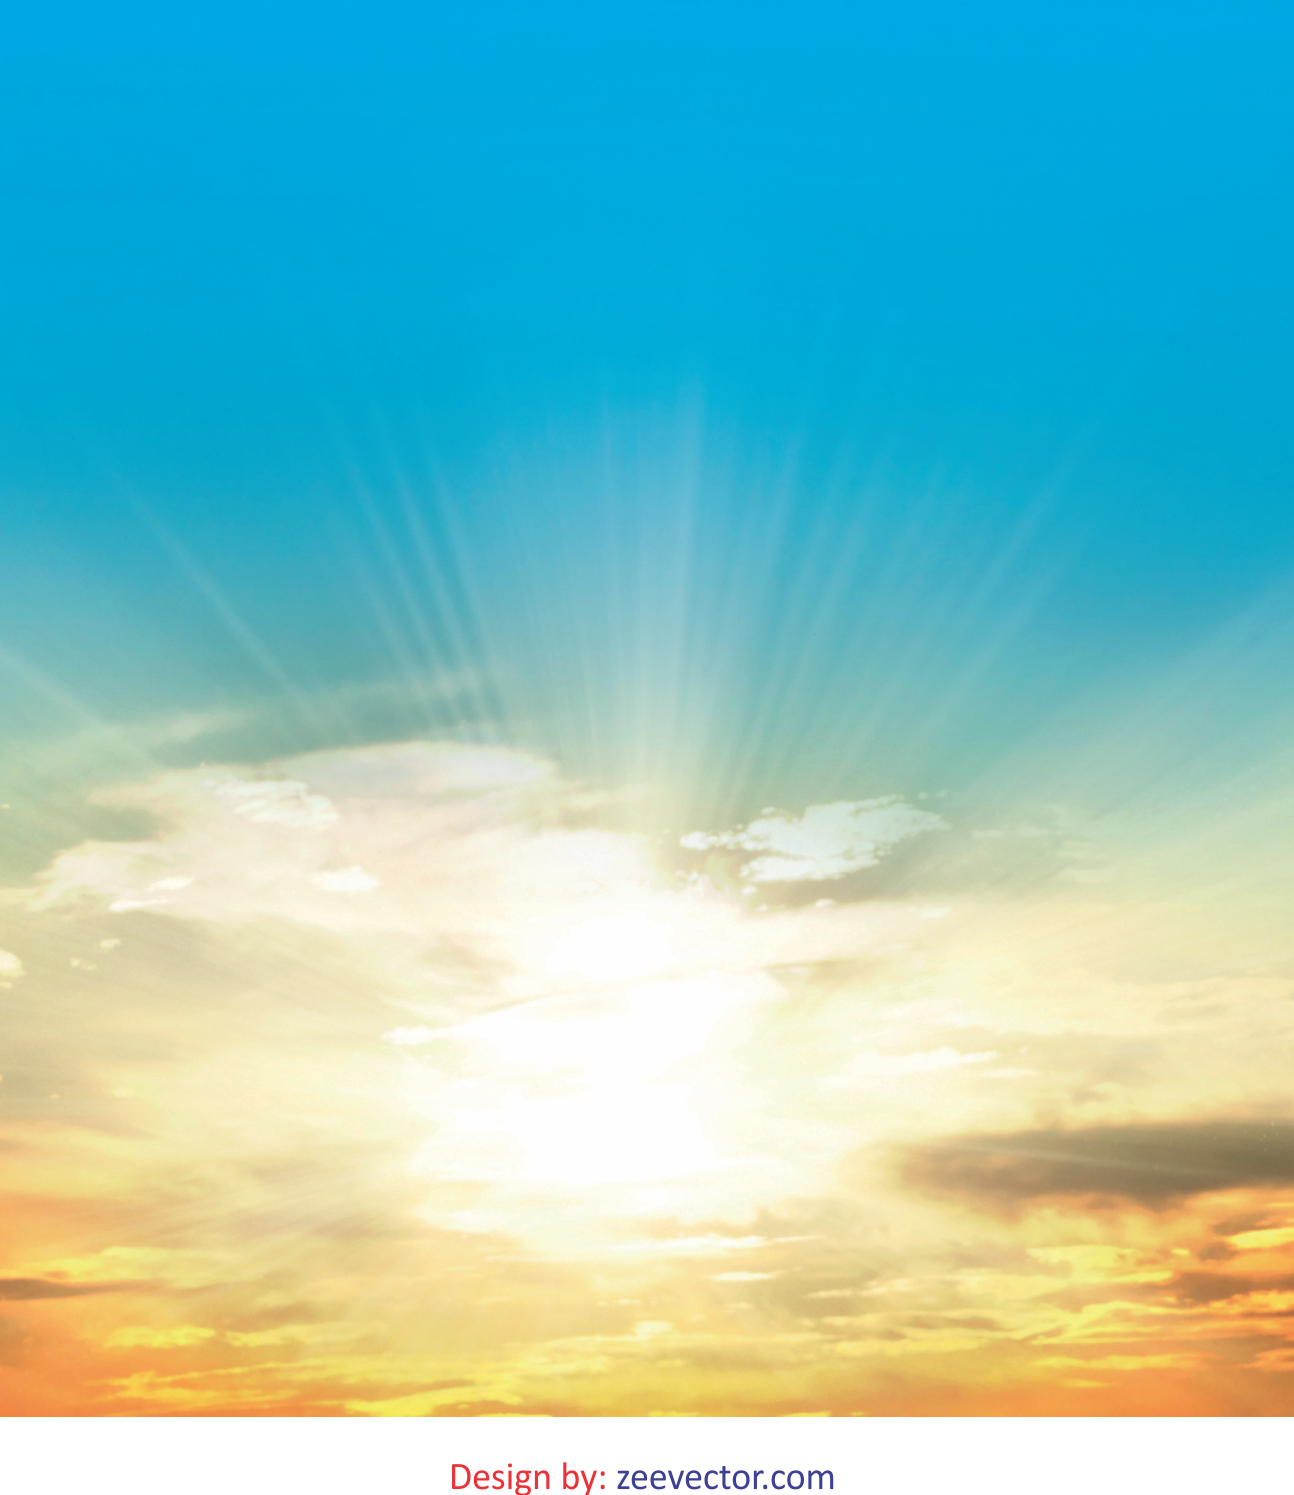 Sunny Sky Background Archives - FREE Vector Design - Cdr, Ai, EPS, PNG, SVG